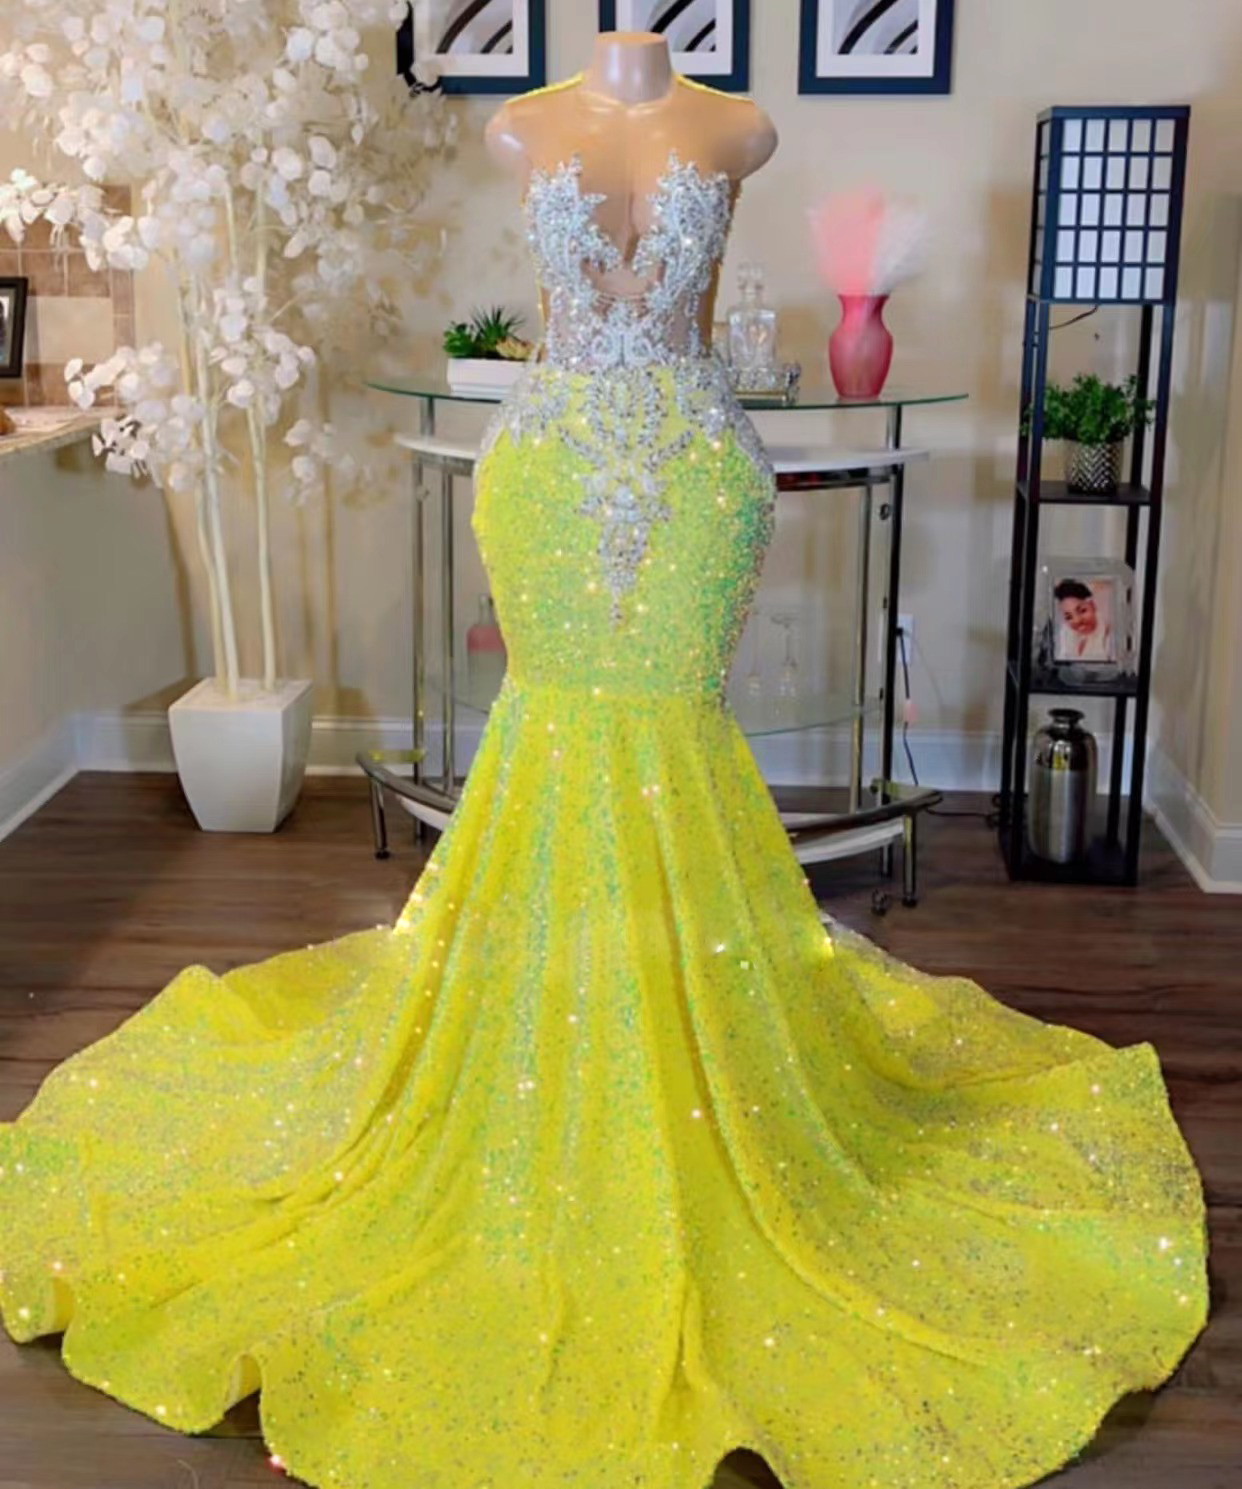 Ministitch Sparkling Lemon Yellow Full Length Net Ball Gown Dress for Baby  Girls (Lemon Yellow) : Amazon.in: Clothing & Accessories